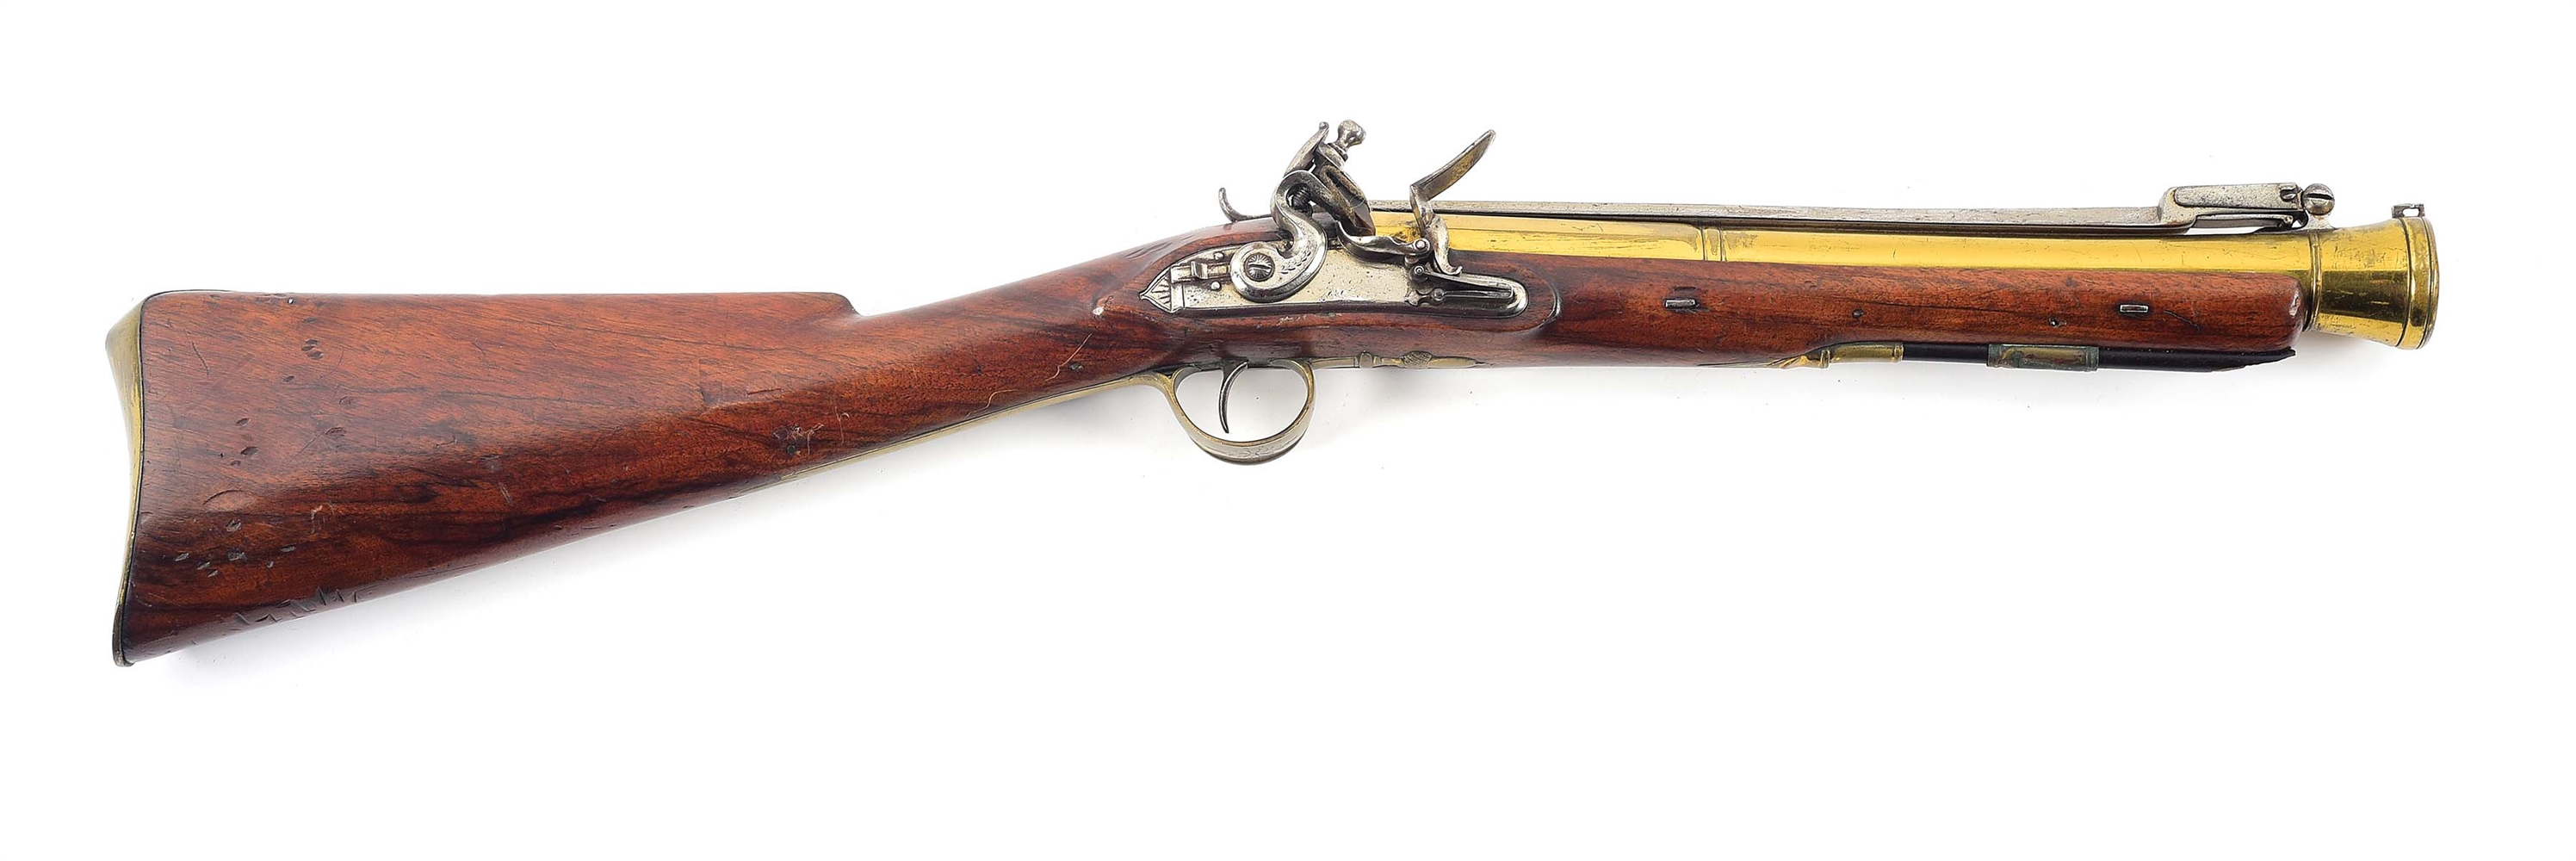 (A) ENGLISH BLUNDERBUSS MARKED LONDON WITH TOP MOUNTED SPRING BAYONET.